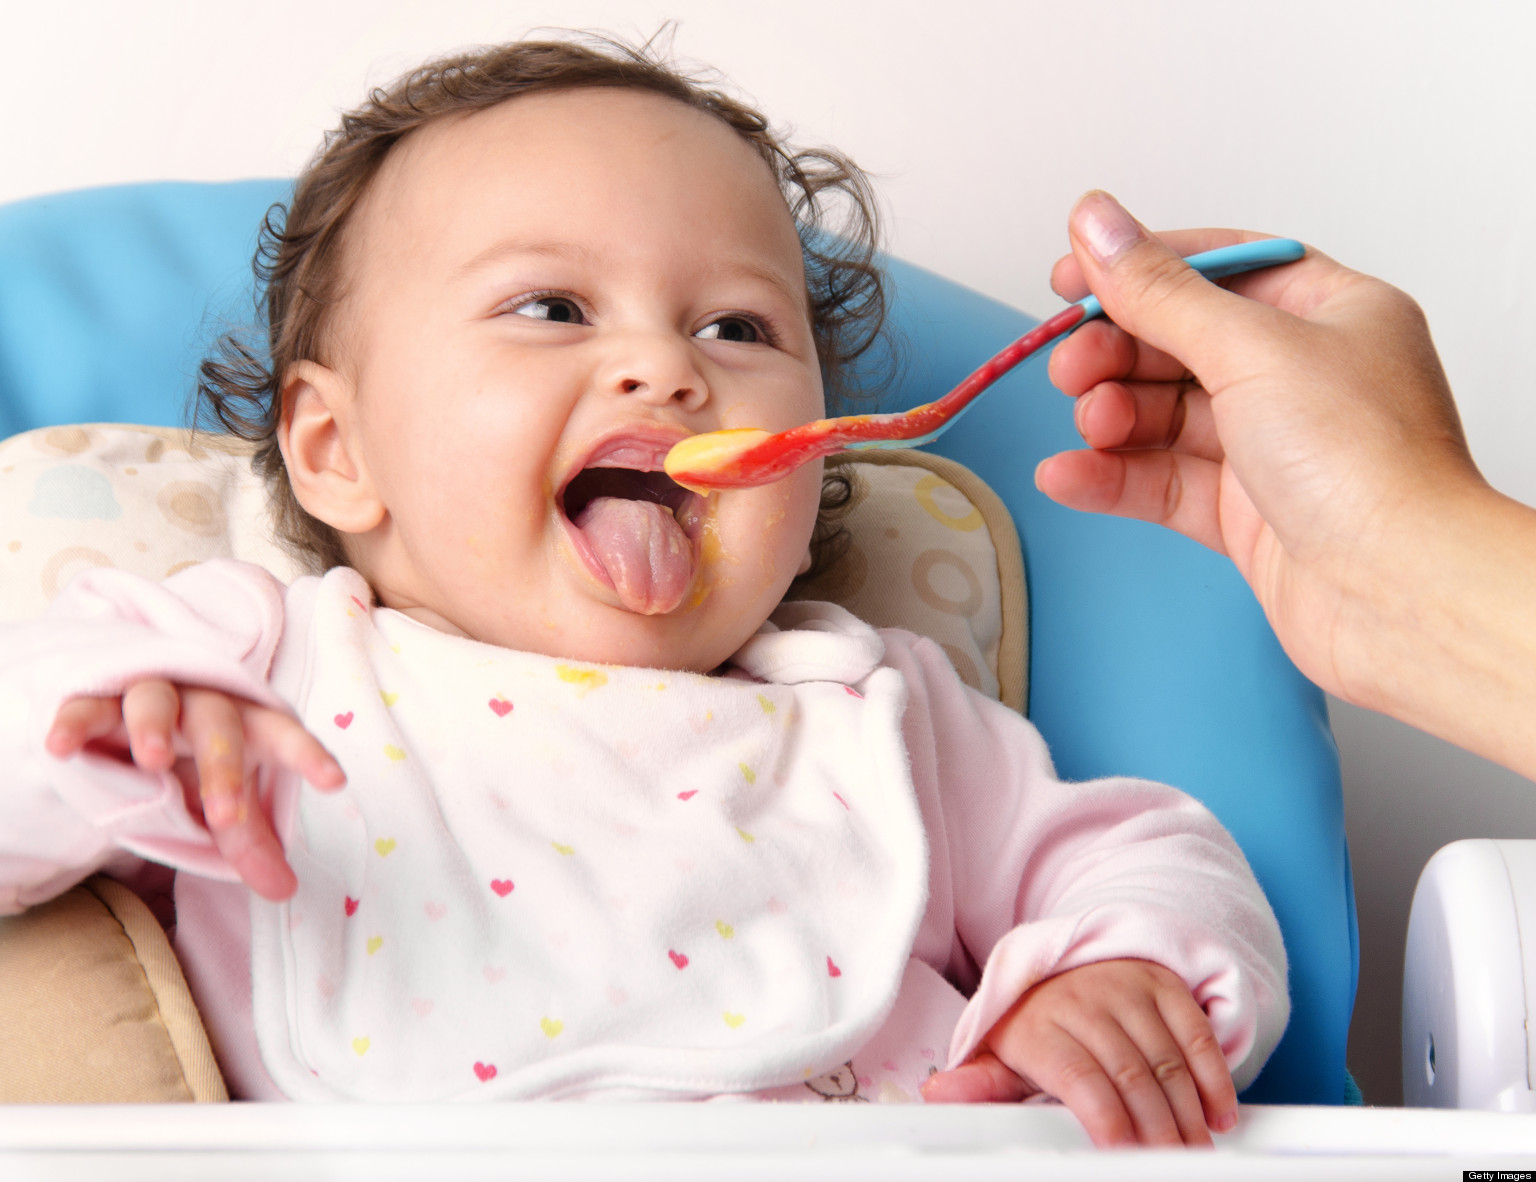 What To Feed A 9-To 12-Month-Old Baby?